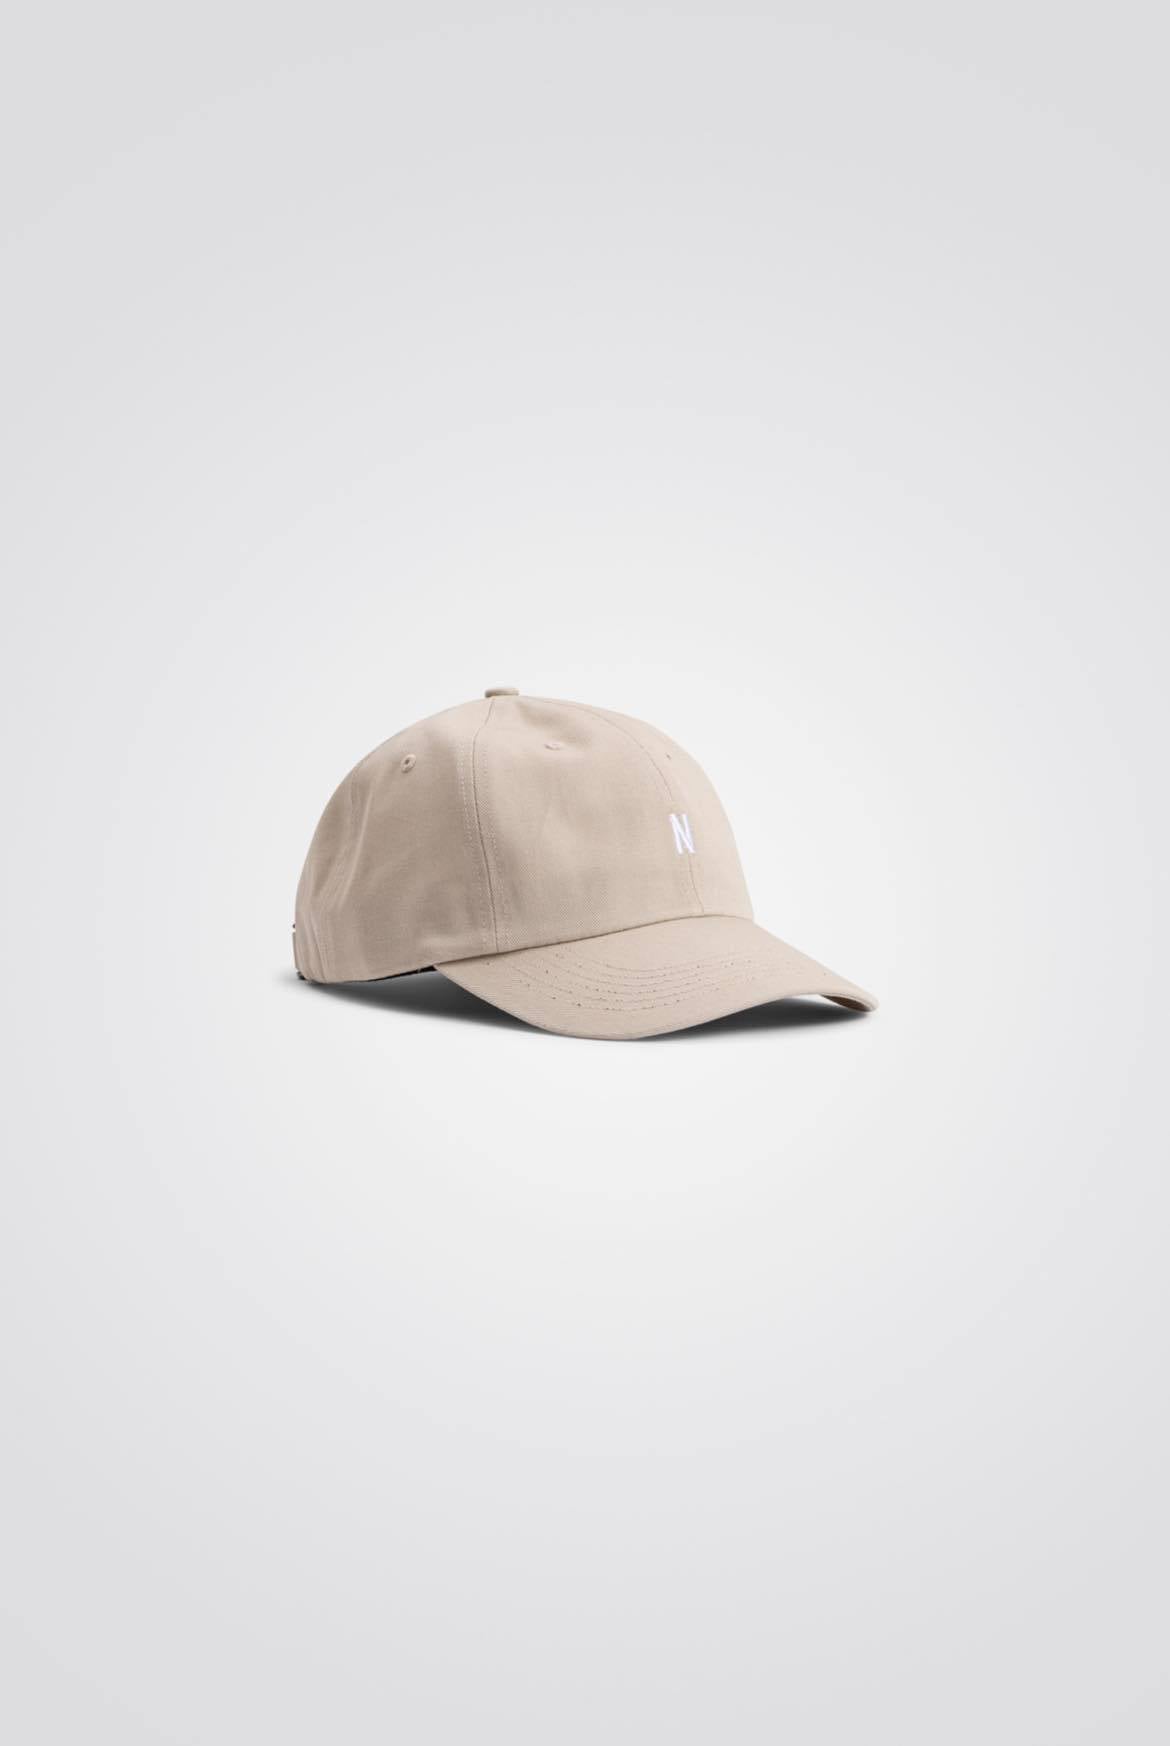 NORSE PROJECTS TWILL SPORTS CAP - MARBLE WHITE